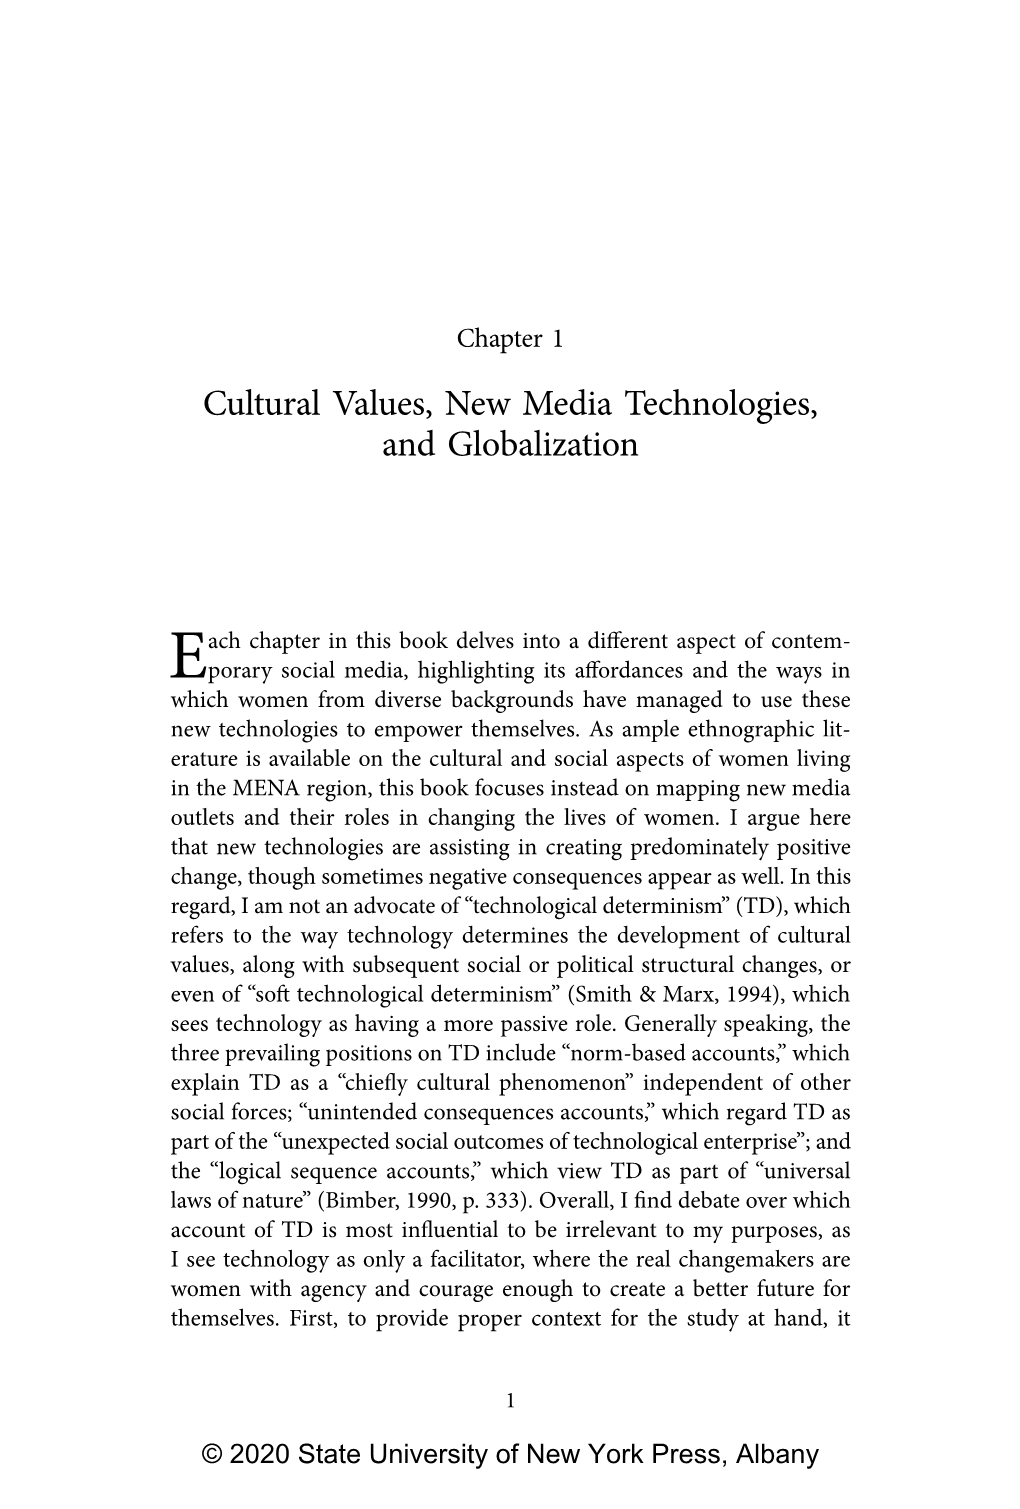 Cultural Values, New Media Technologies, and Globalization